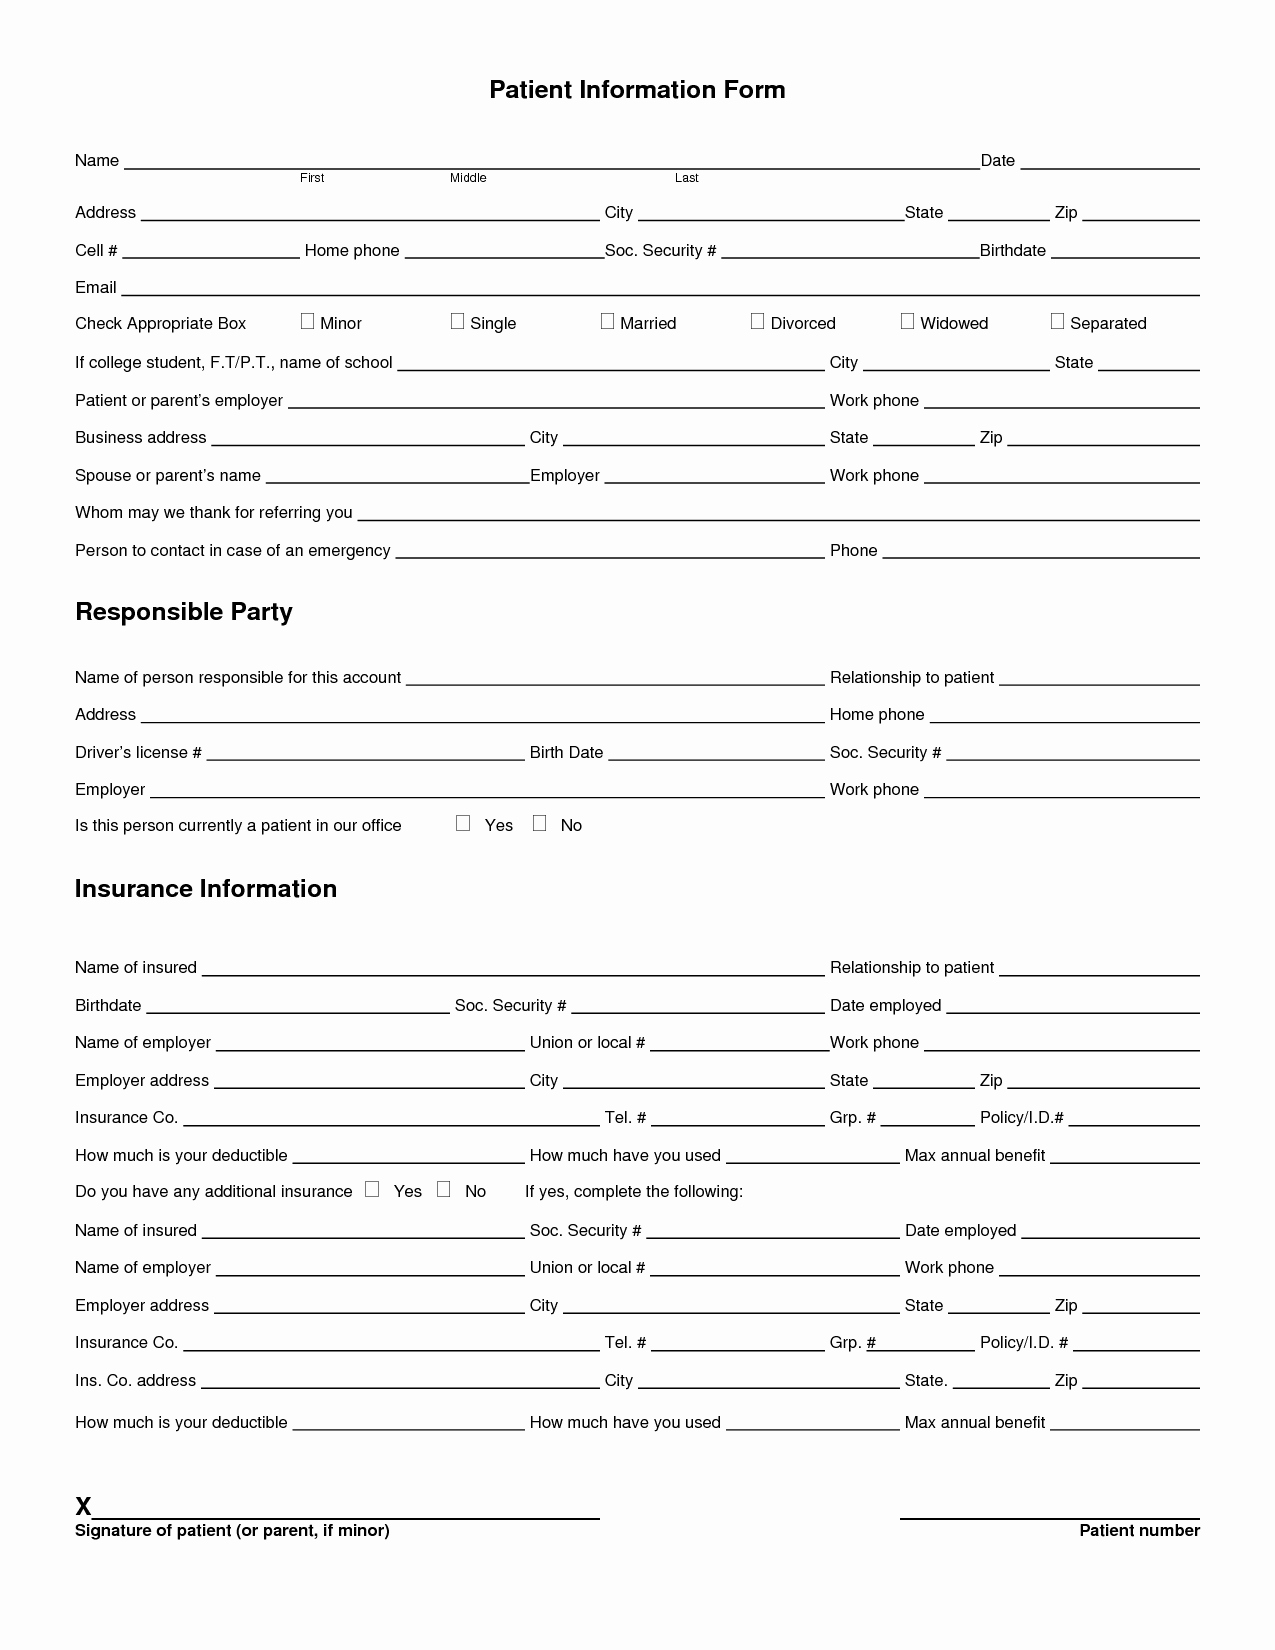 Patient Medical History form Template Lovely Other Printable Gallery Category Page 134